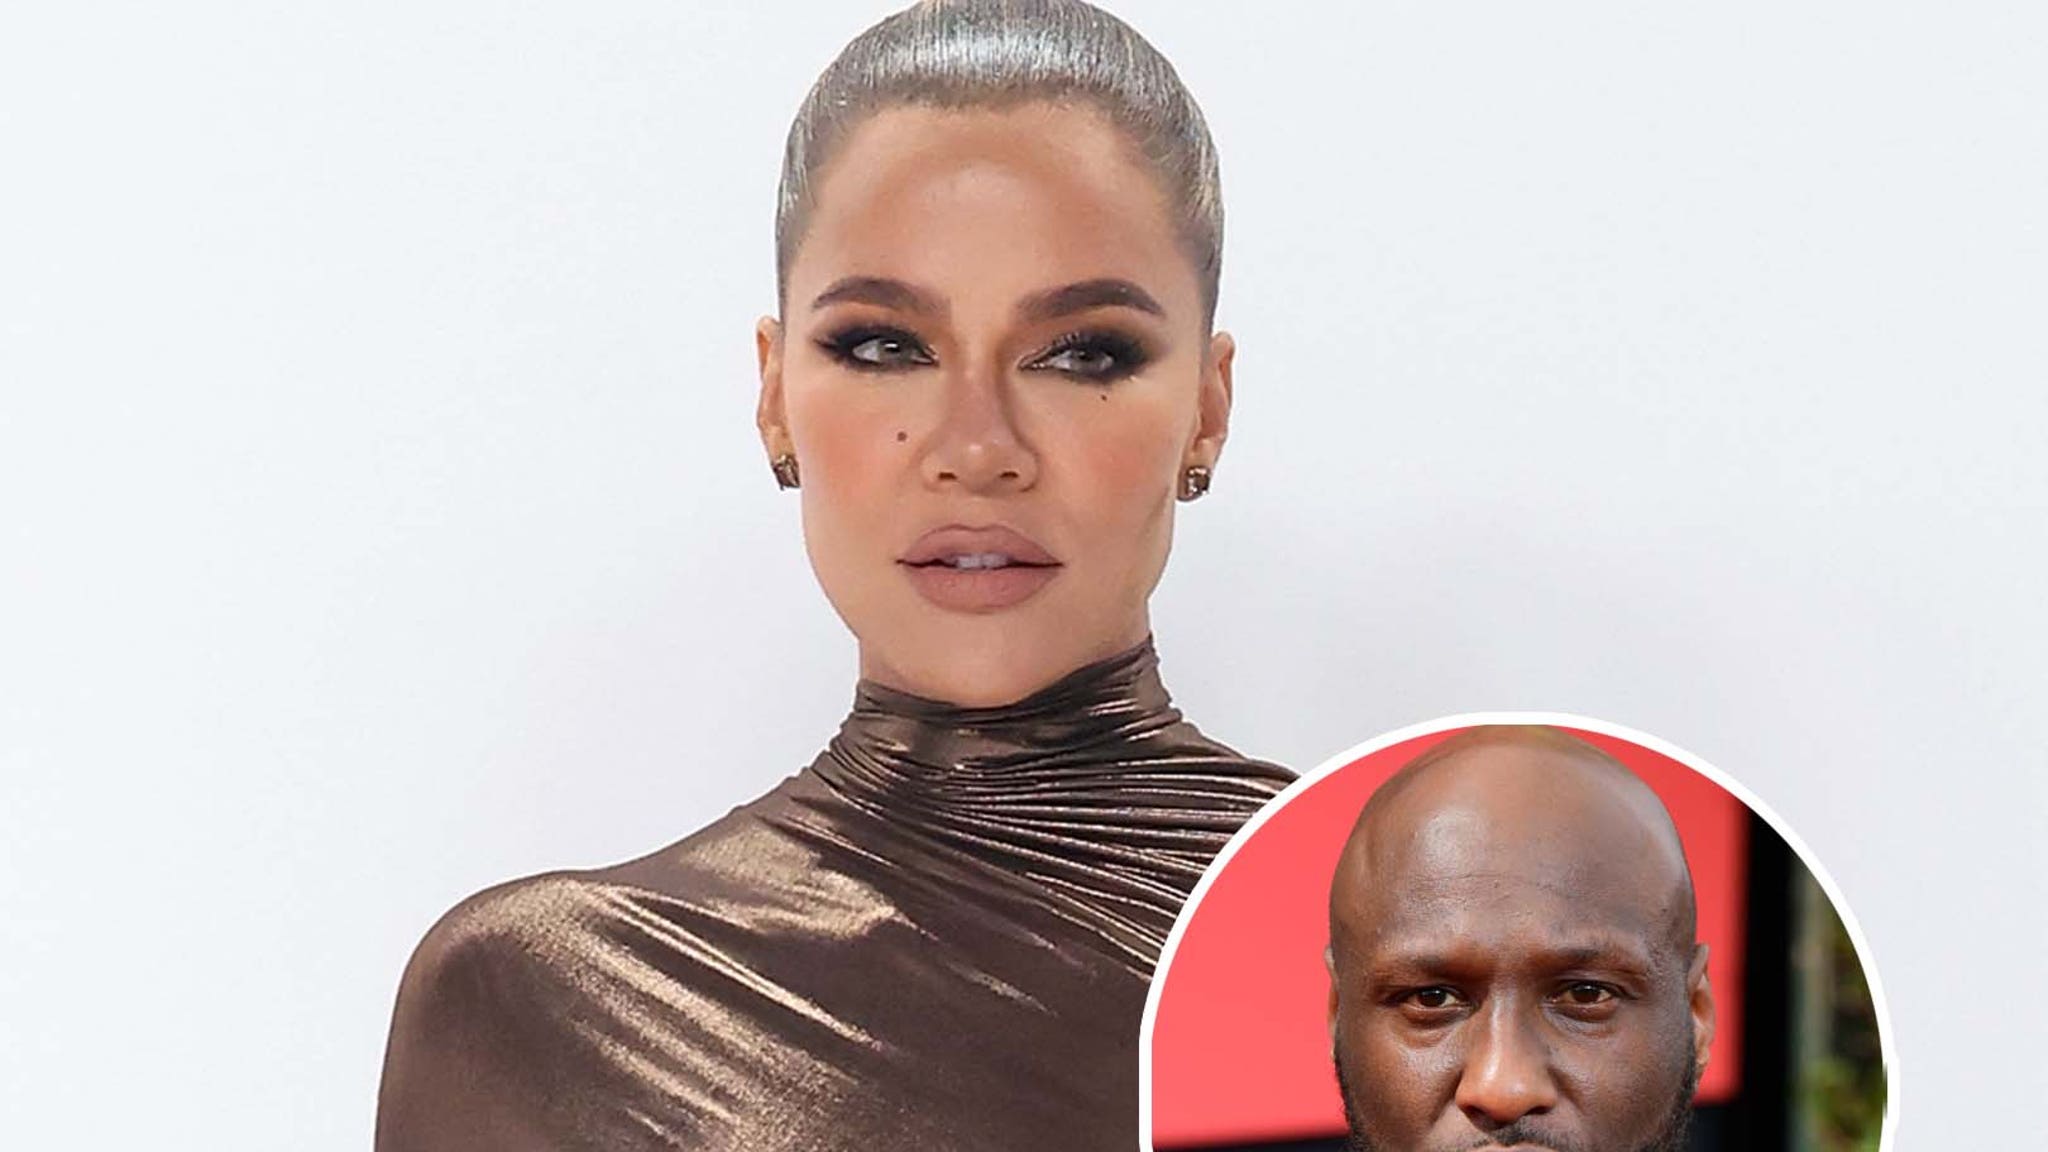 Khloe Kardashian Was 'Obsessive' With Weight After Lamar Odom Divorce